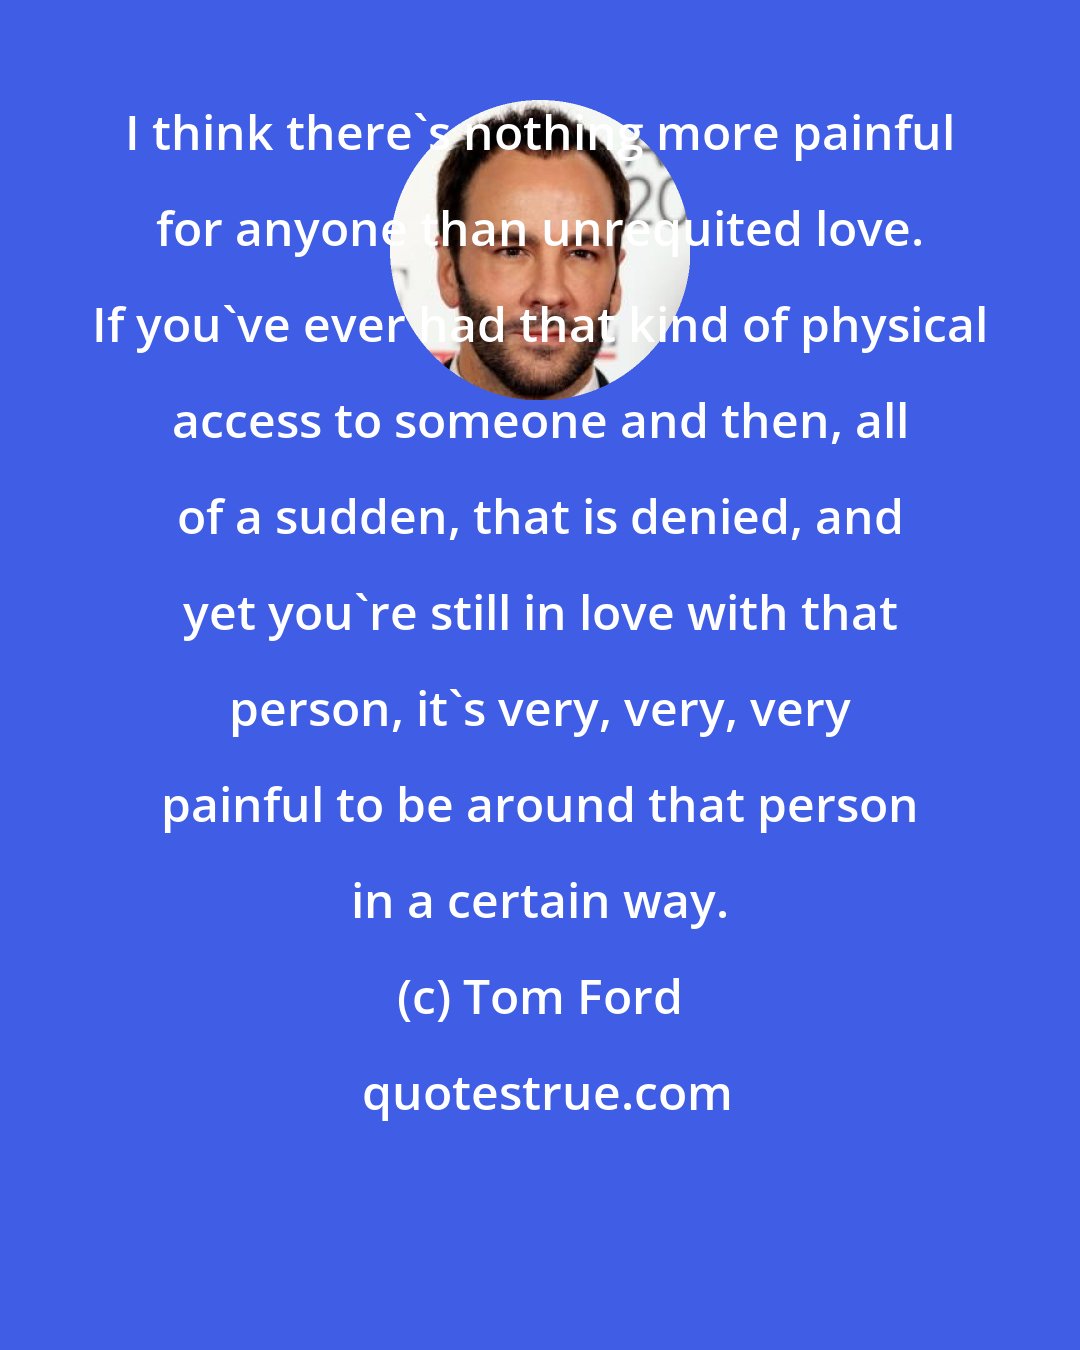 Tom Ford: I think there's nothing more painful for anyone than unrequited love. If you've ever had that kind of physical access to someone and then, all of a sudden, that is denied, and yet you're still in love with that person, it's very, very, very painful to be around that person in a certain way.